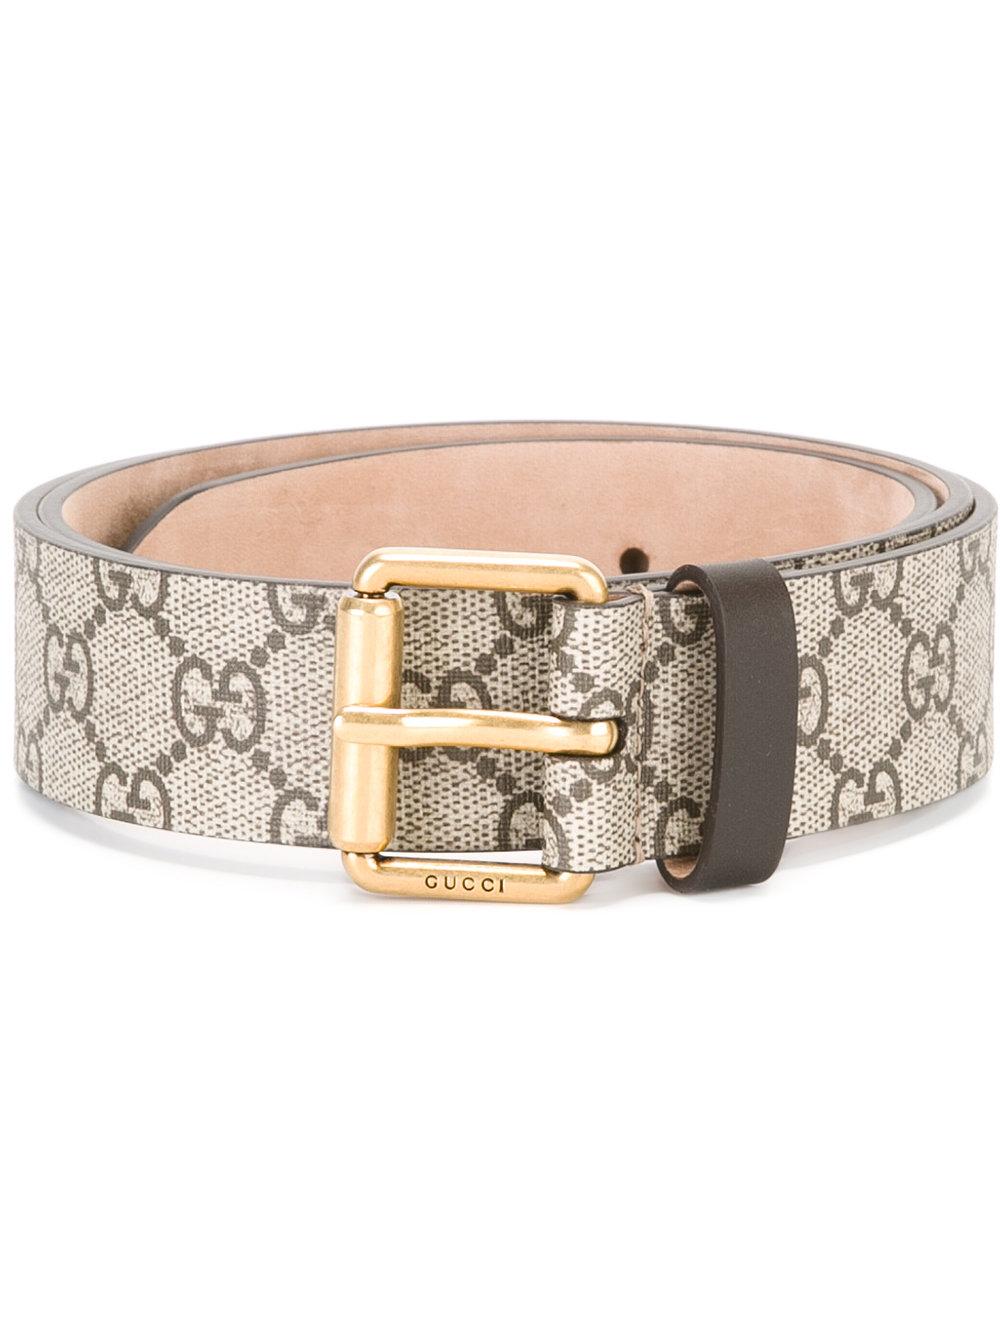 Gucci Gg Supreme Bee Belt in Brown | Lyst